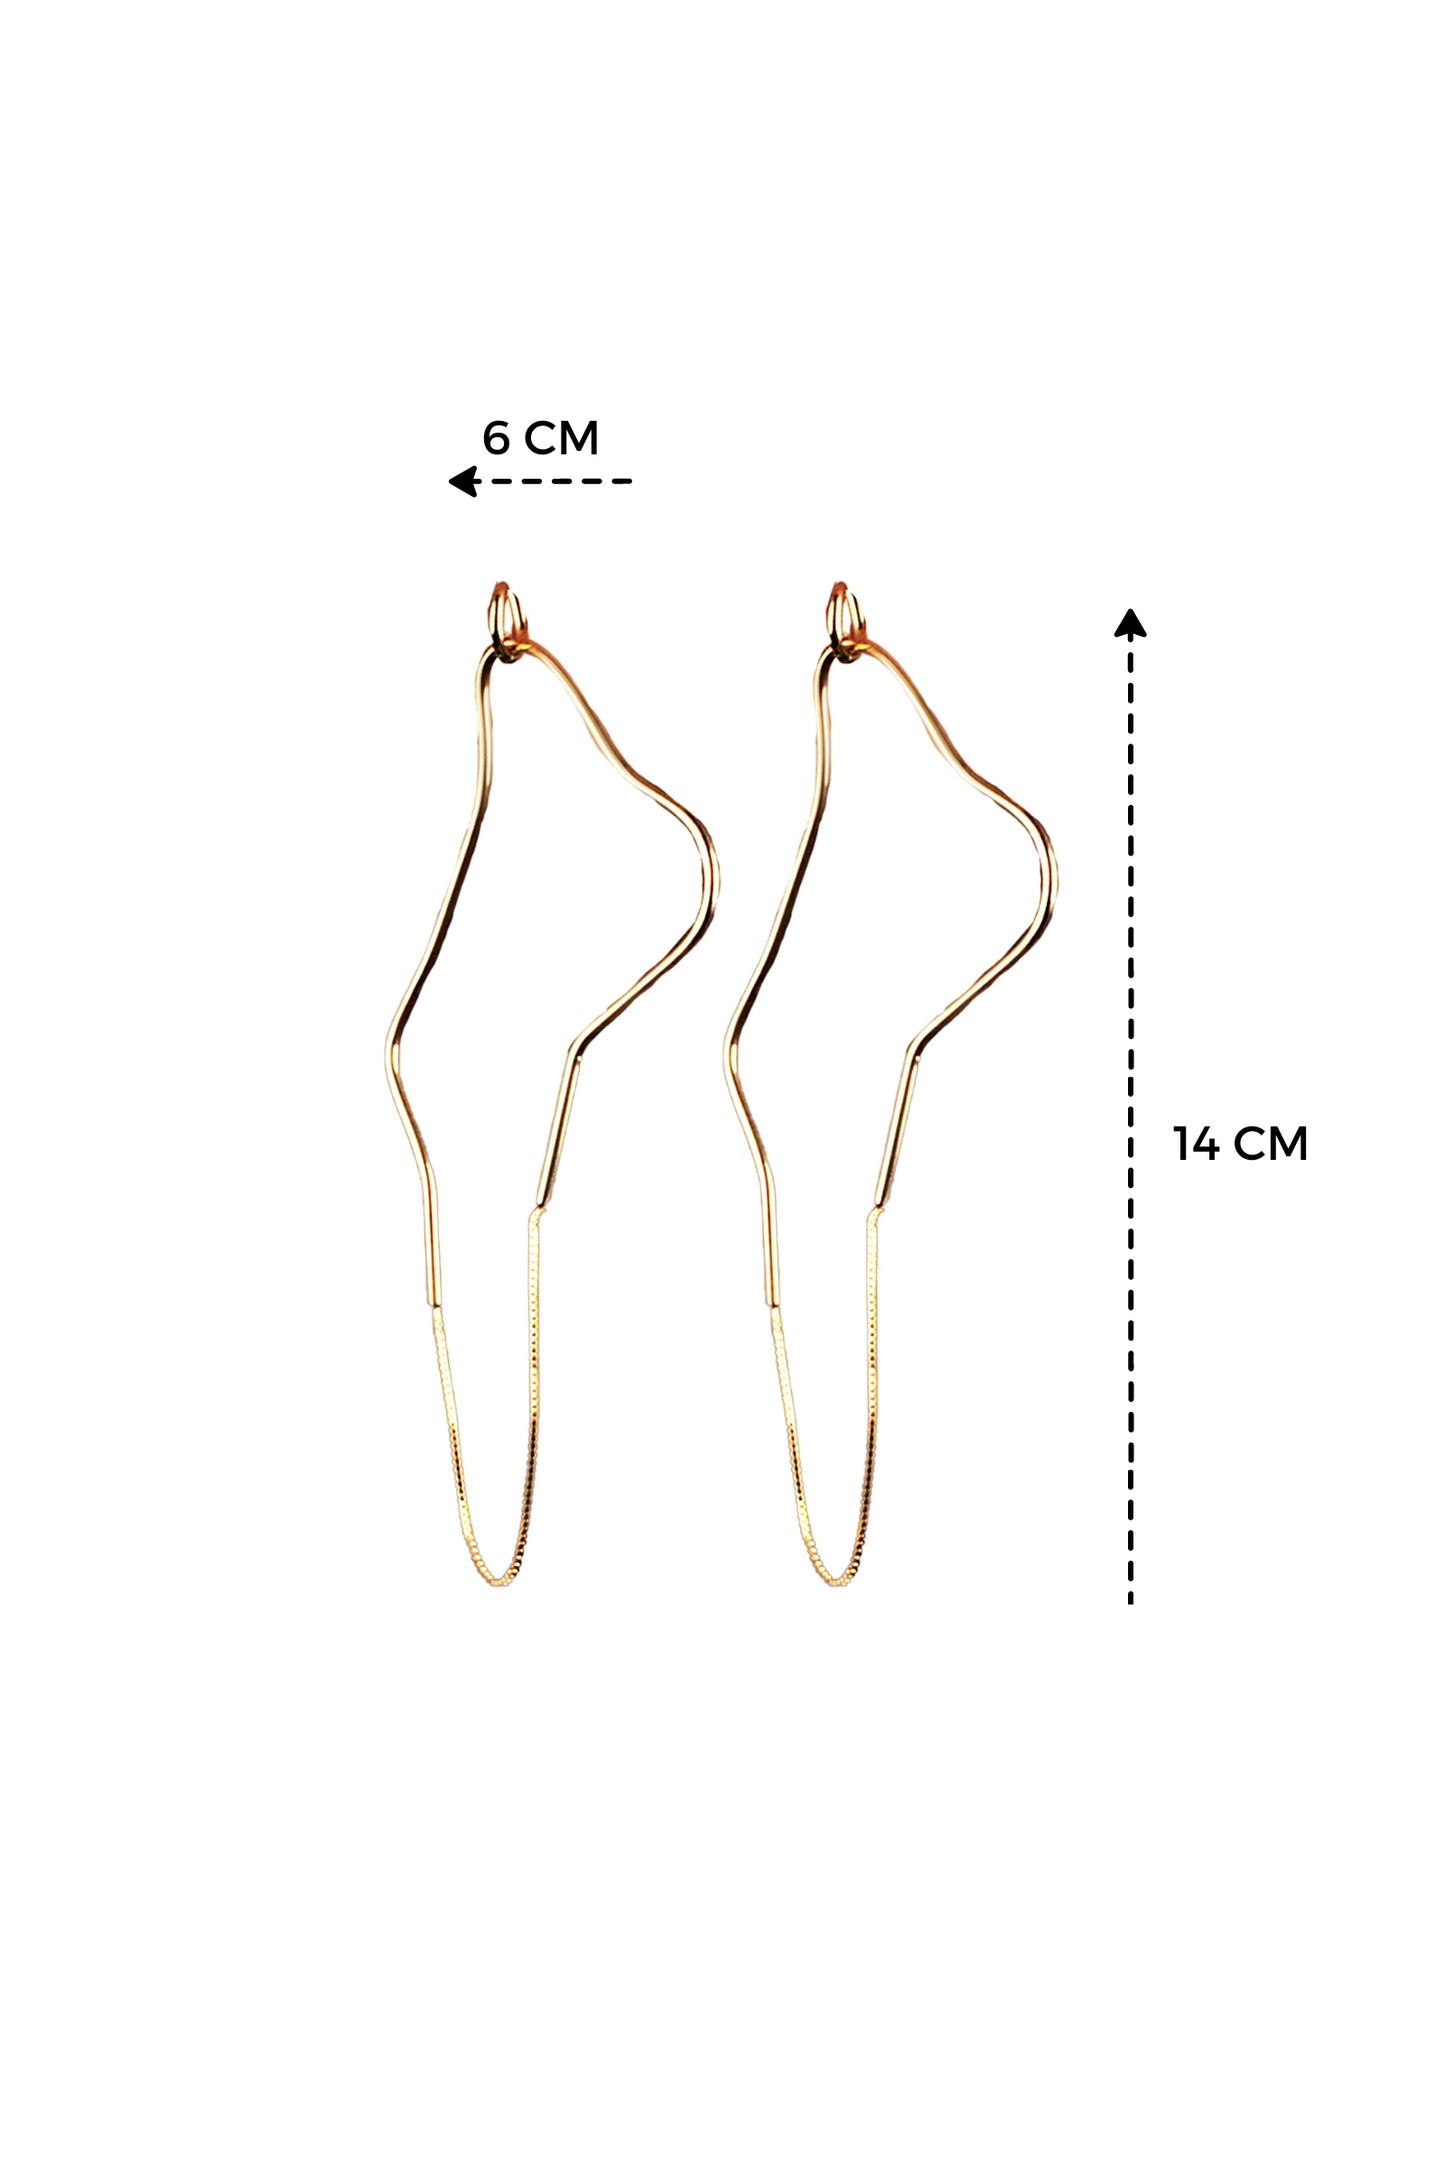 a diagram of a pair of earrings with measurements